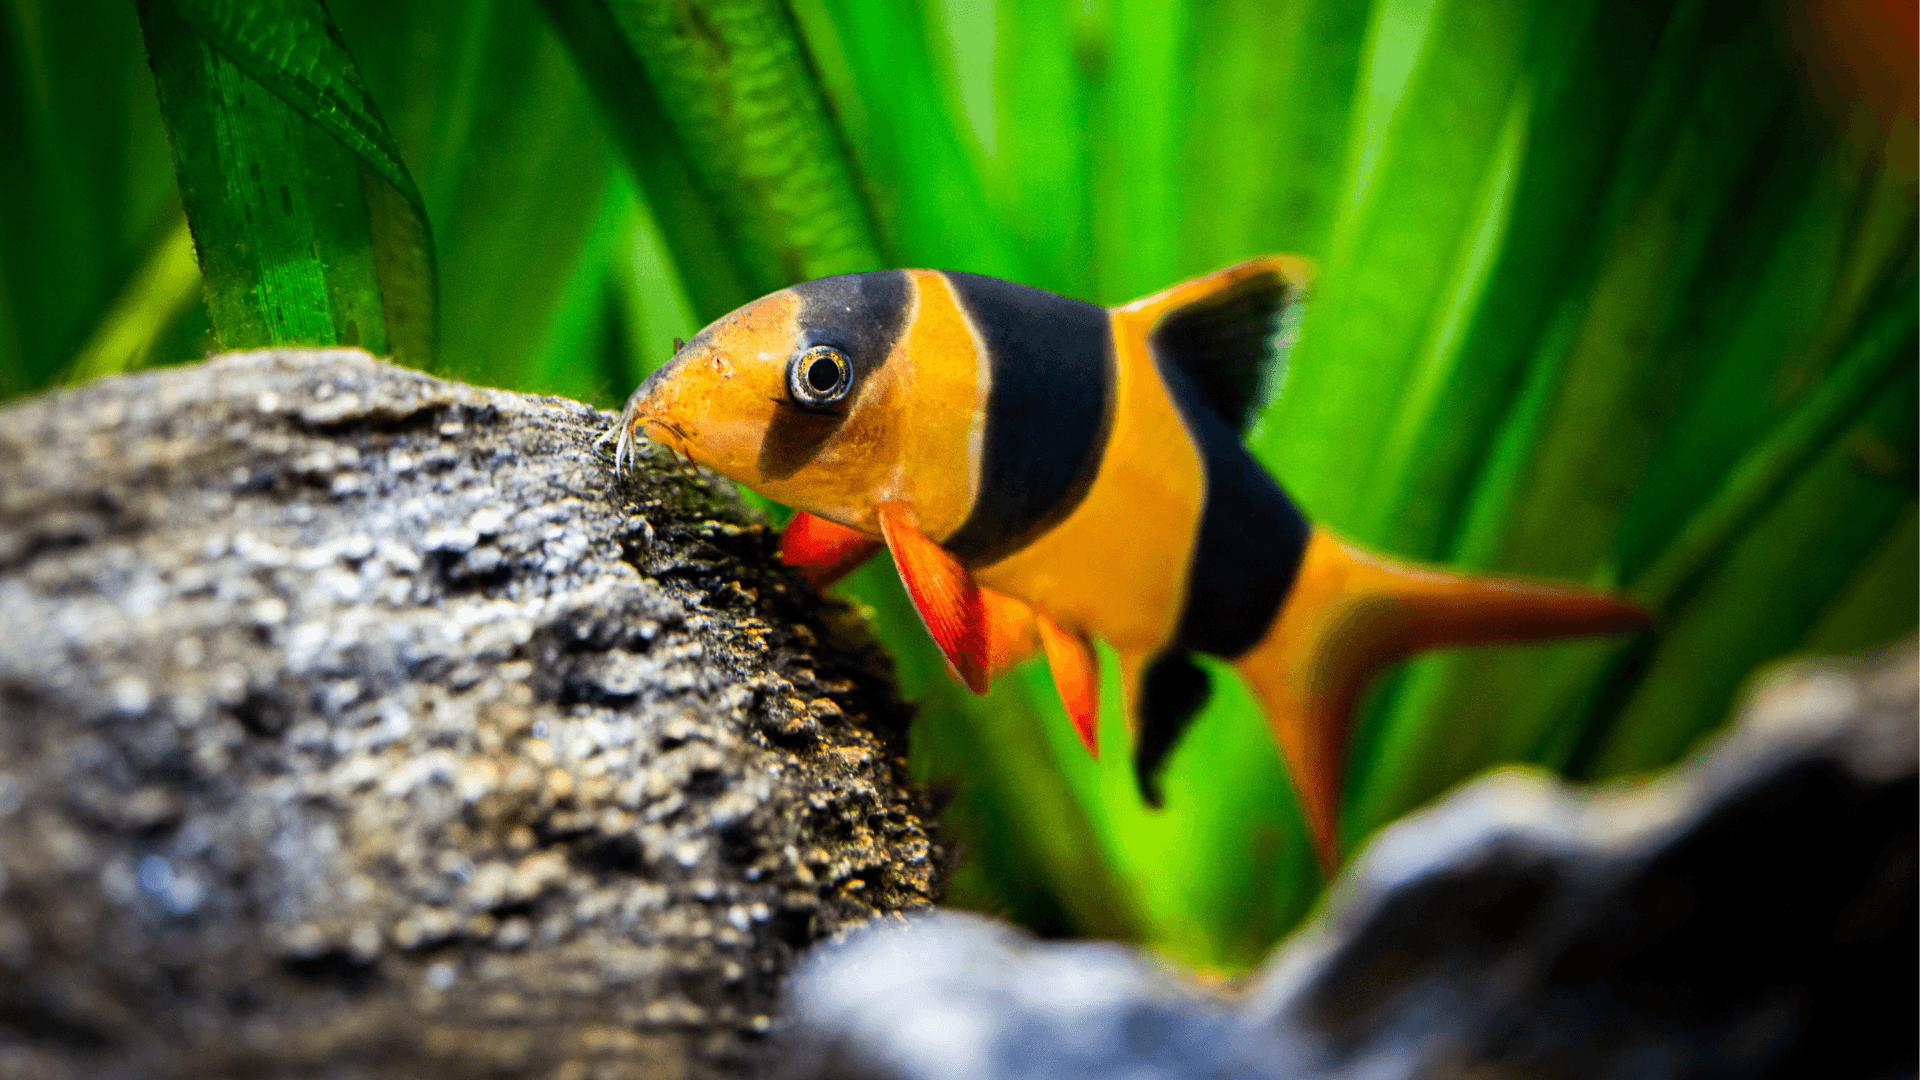 A photo of Loaches